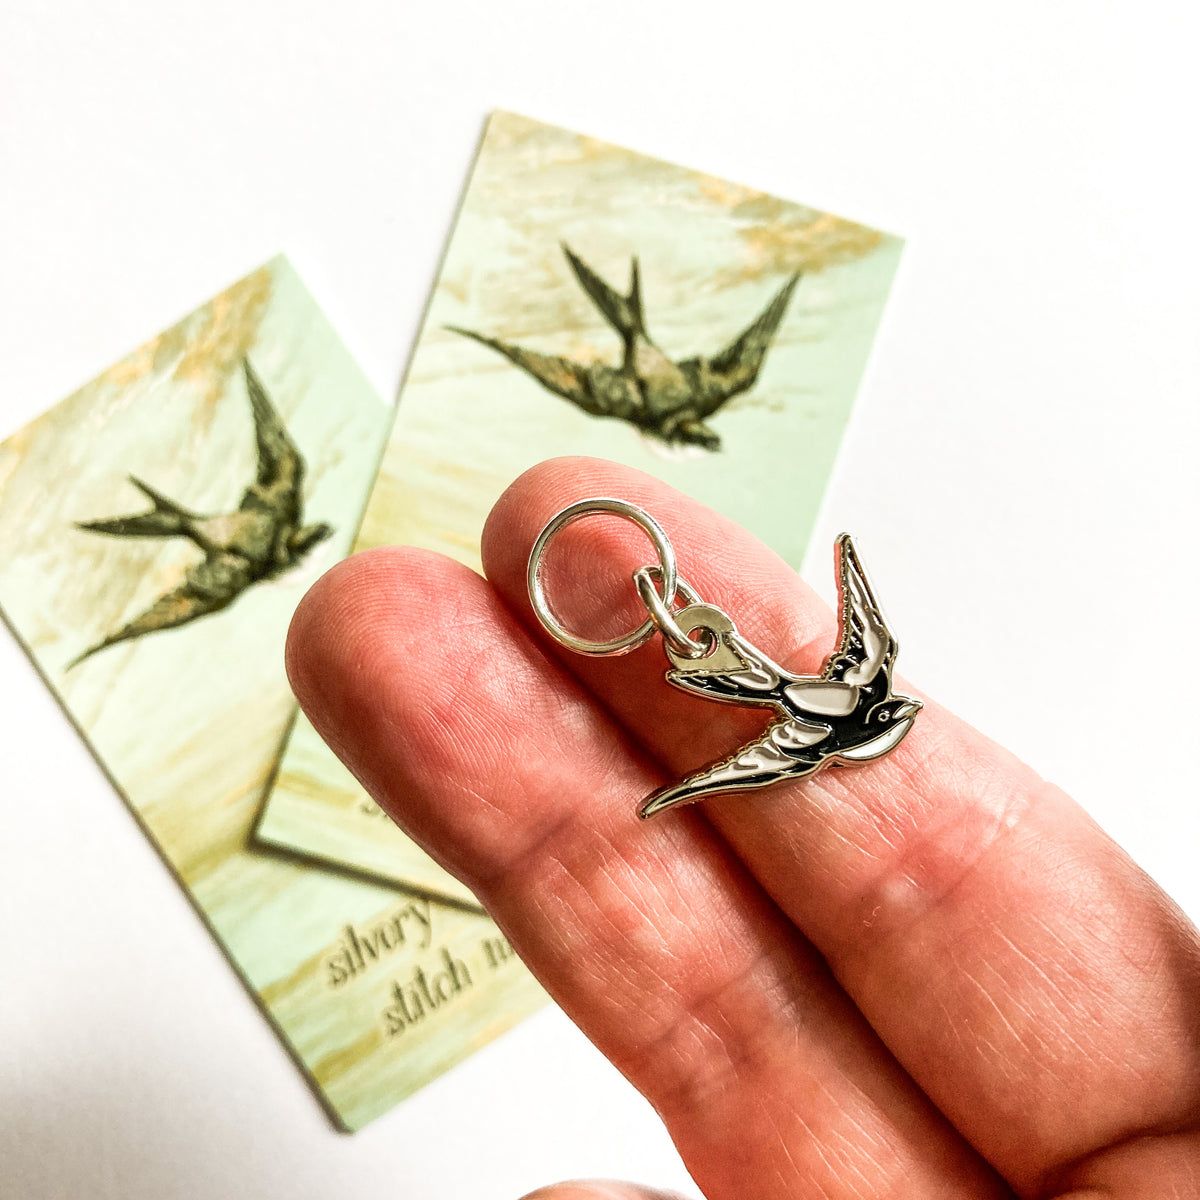 Silvery Swallow Creative Single Stitch Marker from Firefly Notes